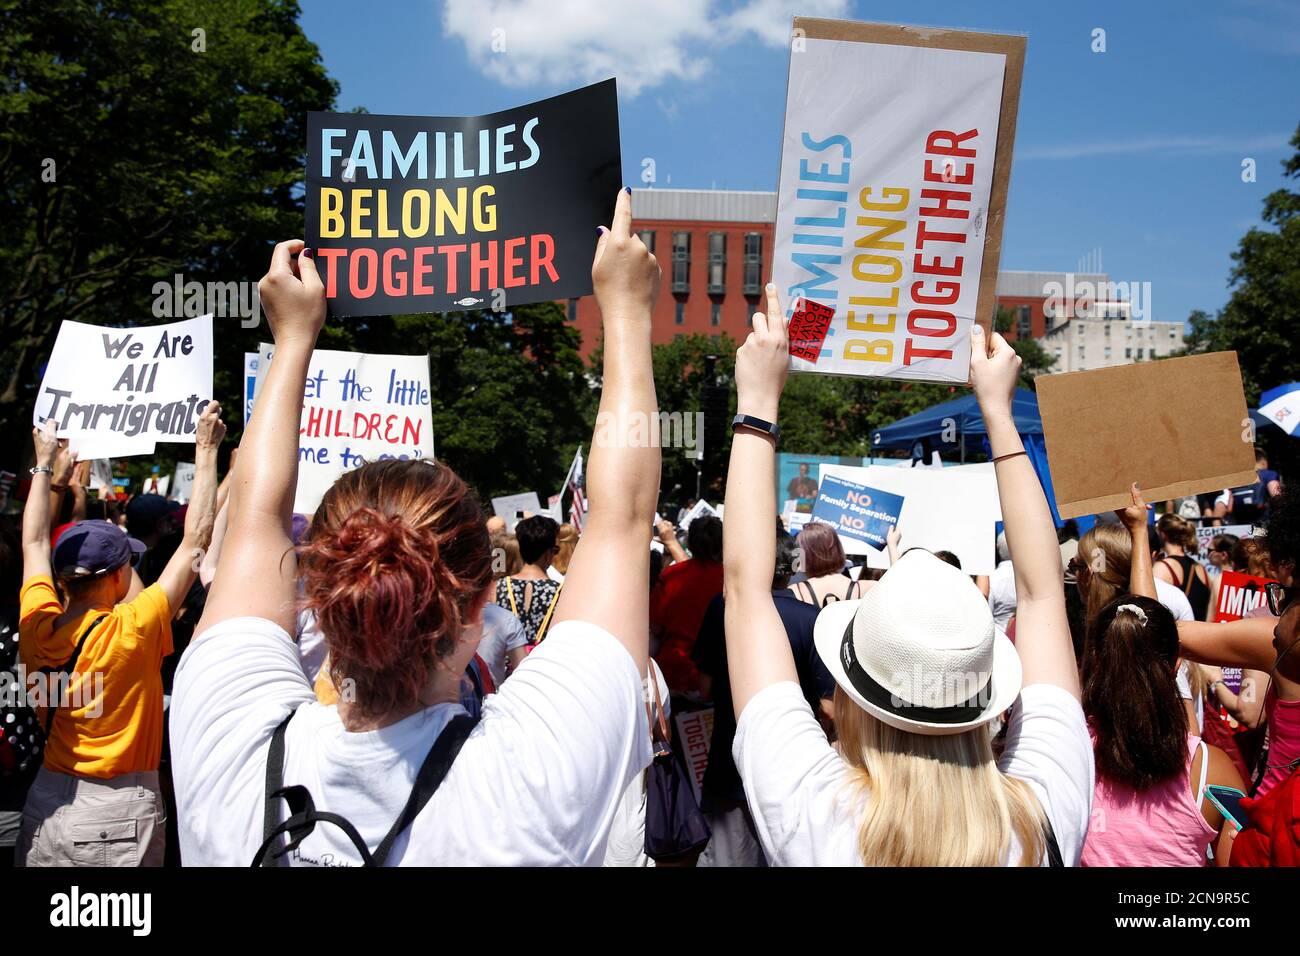 Immigration activists hold signs against family separation during a rally to protest against the Trump Administration's immigration policy outside the White House in Washington, U.S., June 30, 2018. REUTERS/Joshua Roberts Stock Photo